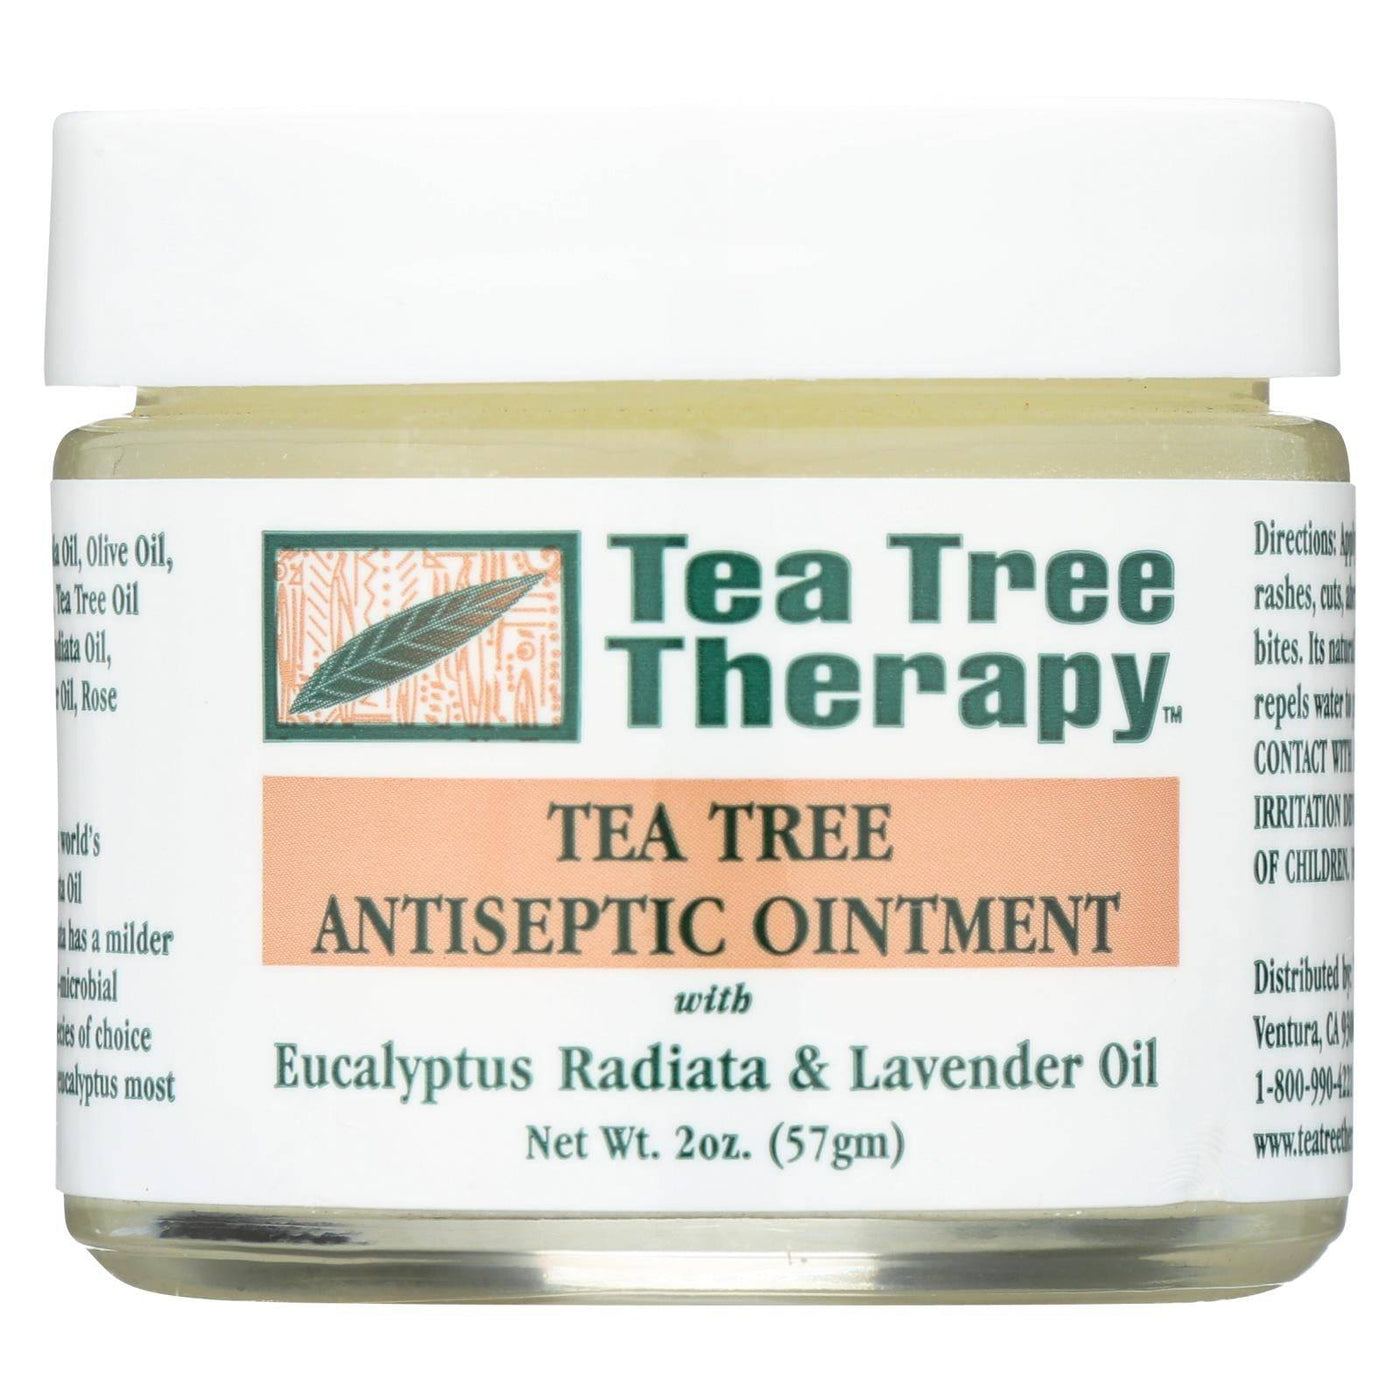 Buy Tea Tree Therapy Antiseptic Ointment Eucalyptus Australiana And Lavender Oil - 2 Oz  at OnlyNaturals.us